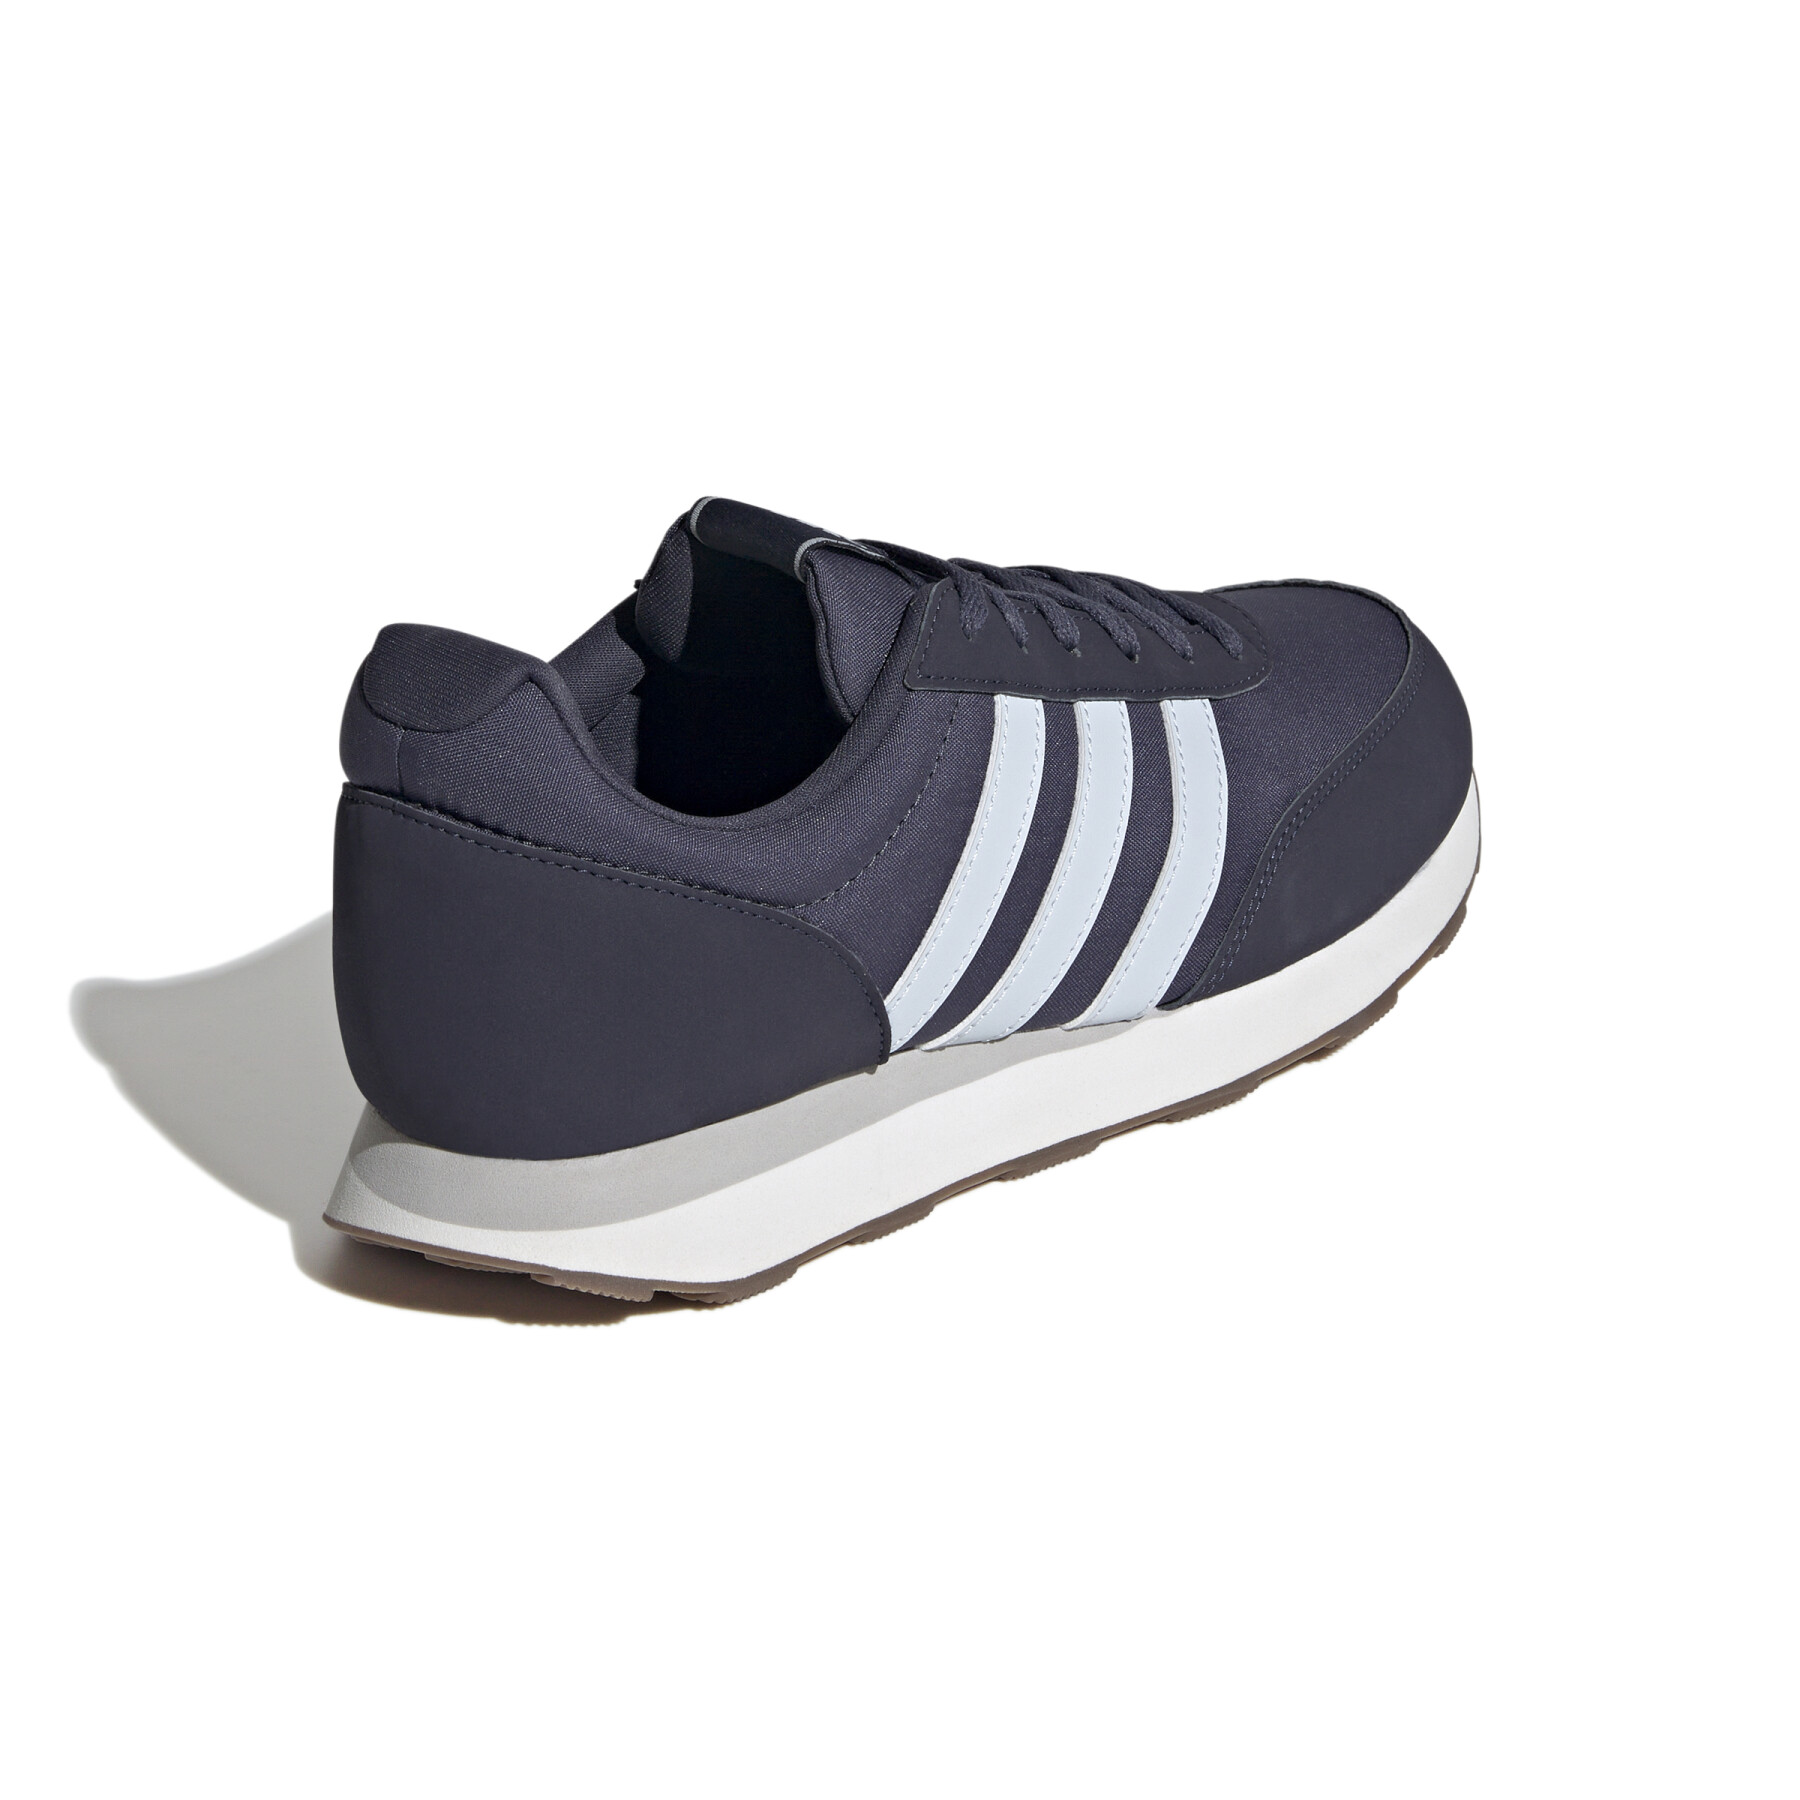 Running shoes adidas 60s 3.0